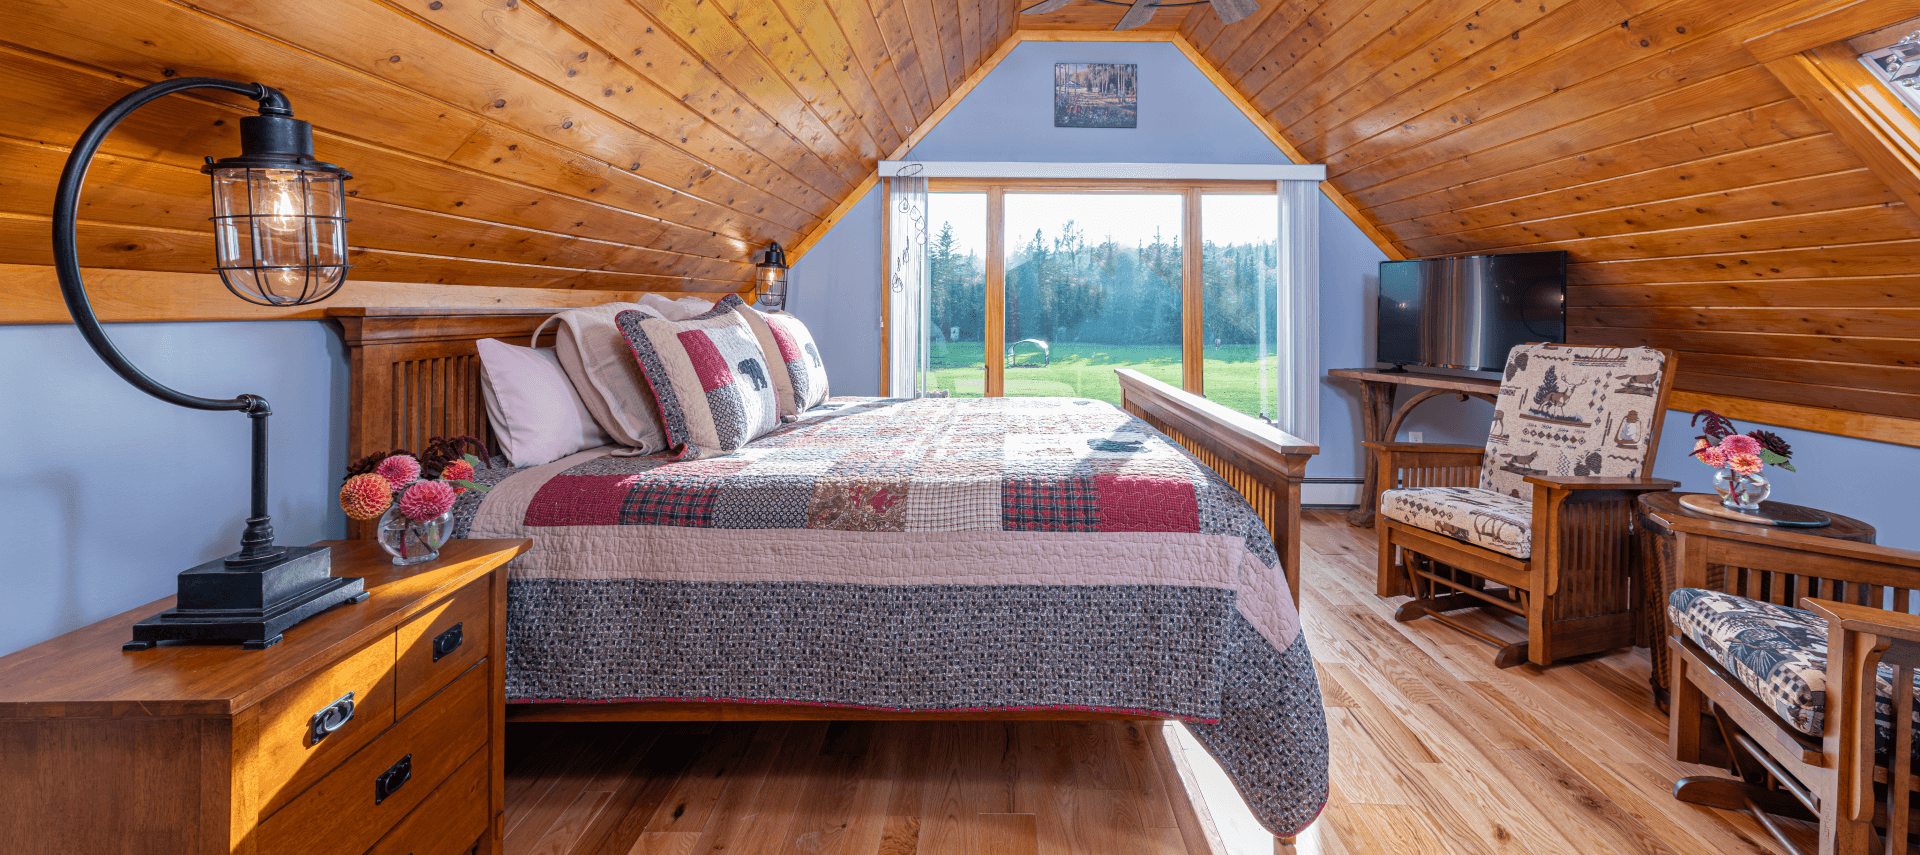 King bed with patchwork quilt in front of large window overlooking a pasture